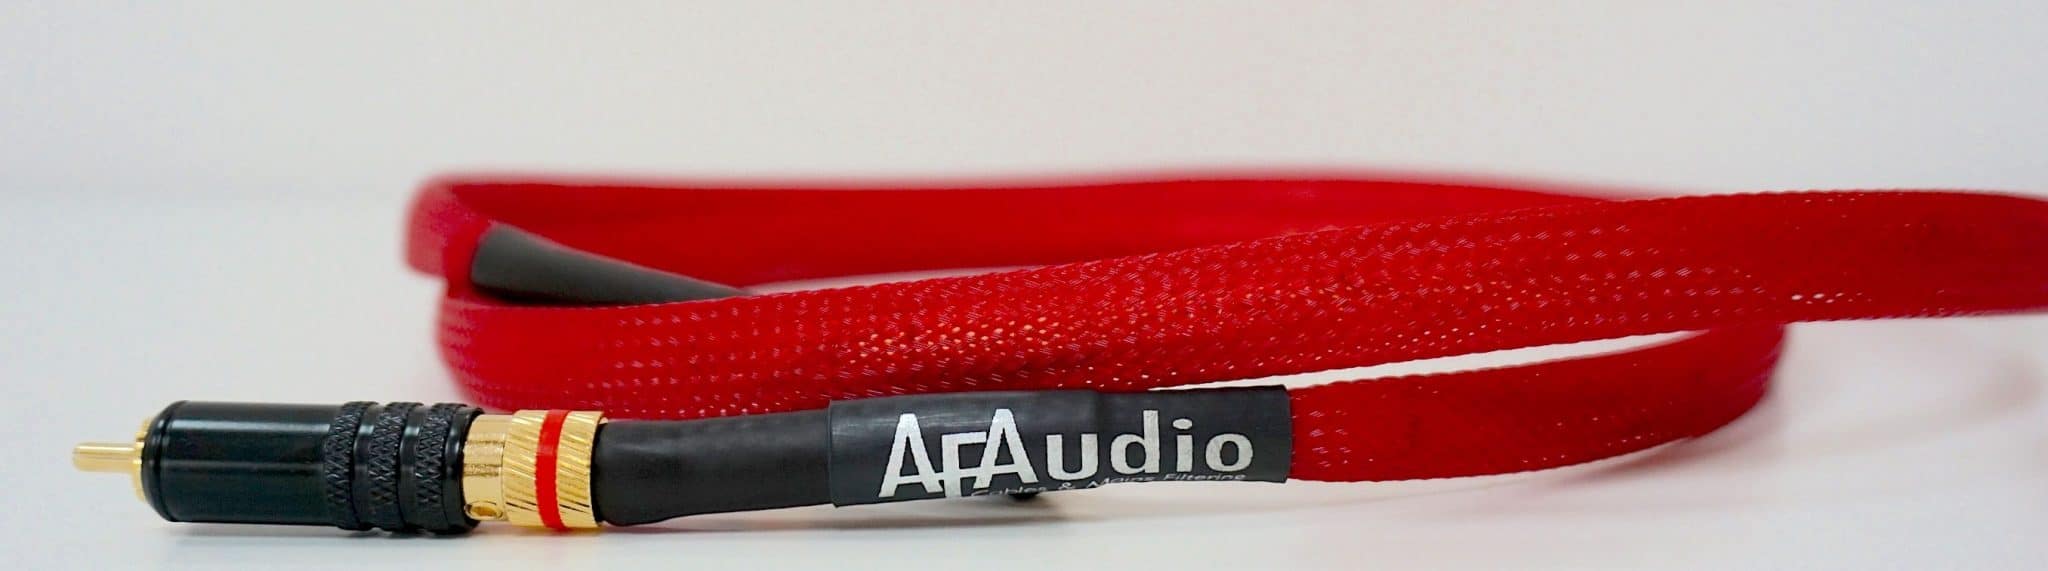 ARCHIE COAX CABLE FROM AF AUDIO